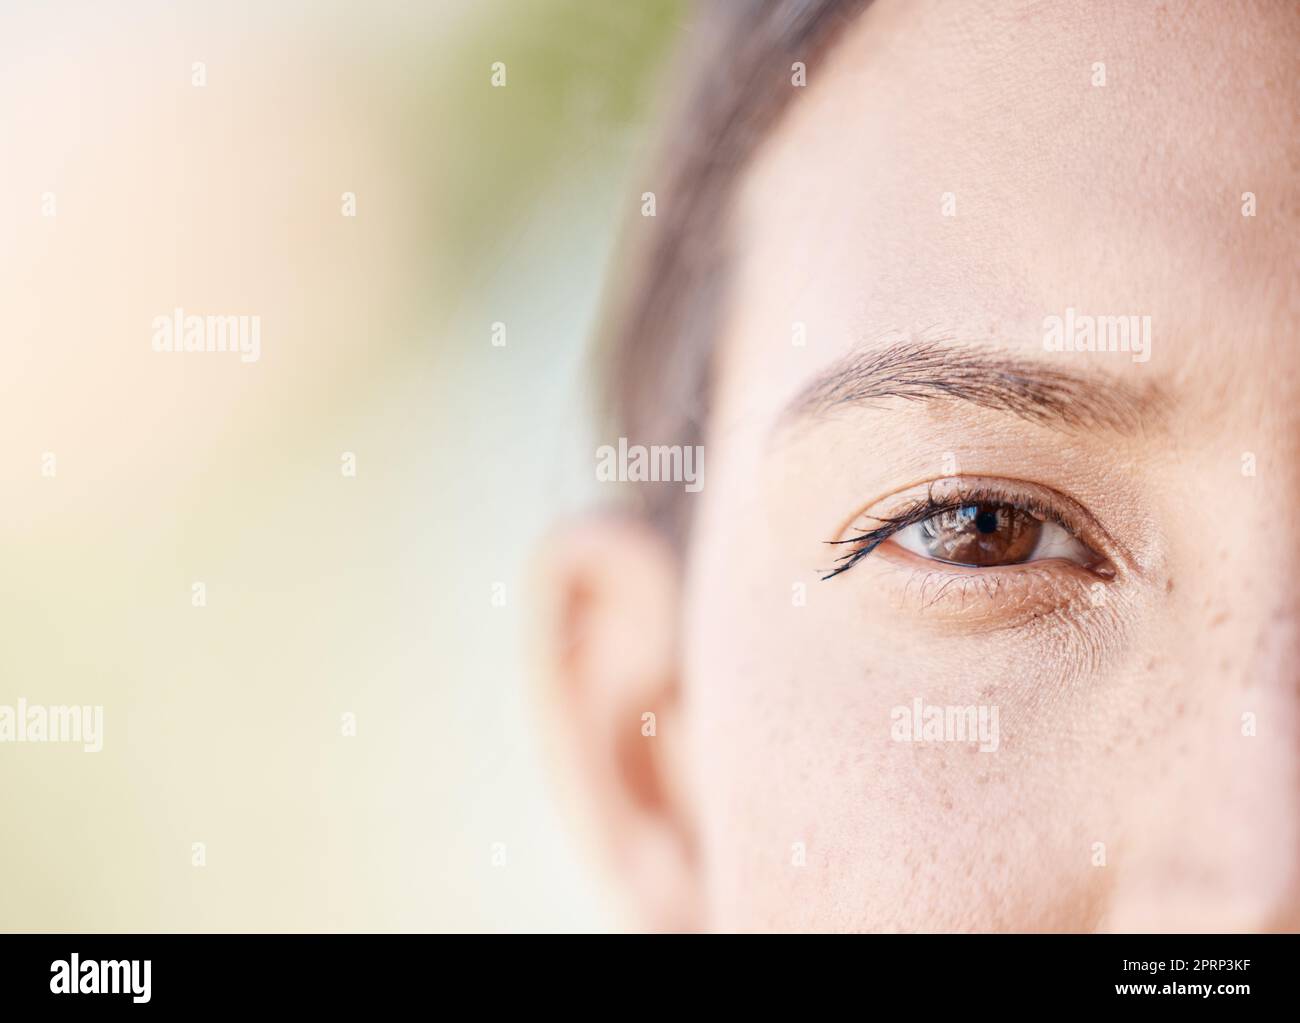 Face portrait of a woman eye thinking with mockup or blurred background with bokeh. Head of a serious or focus young female with light freckle skin, staring with brown eyes outdoors in nature Stock Photo